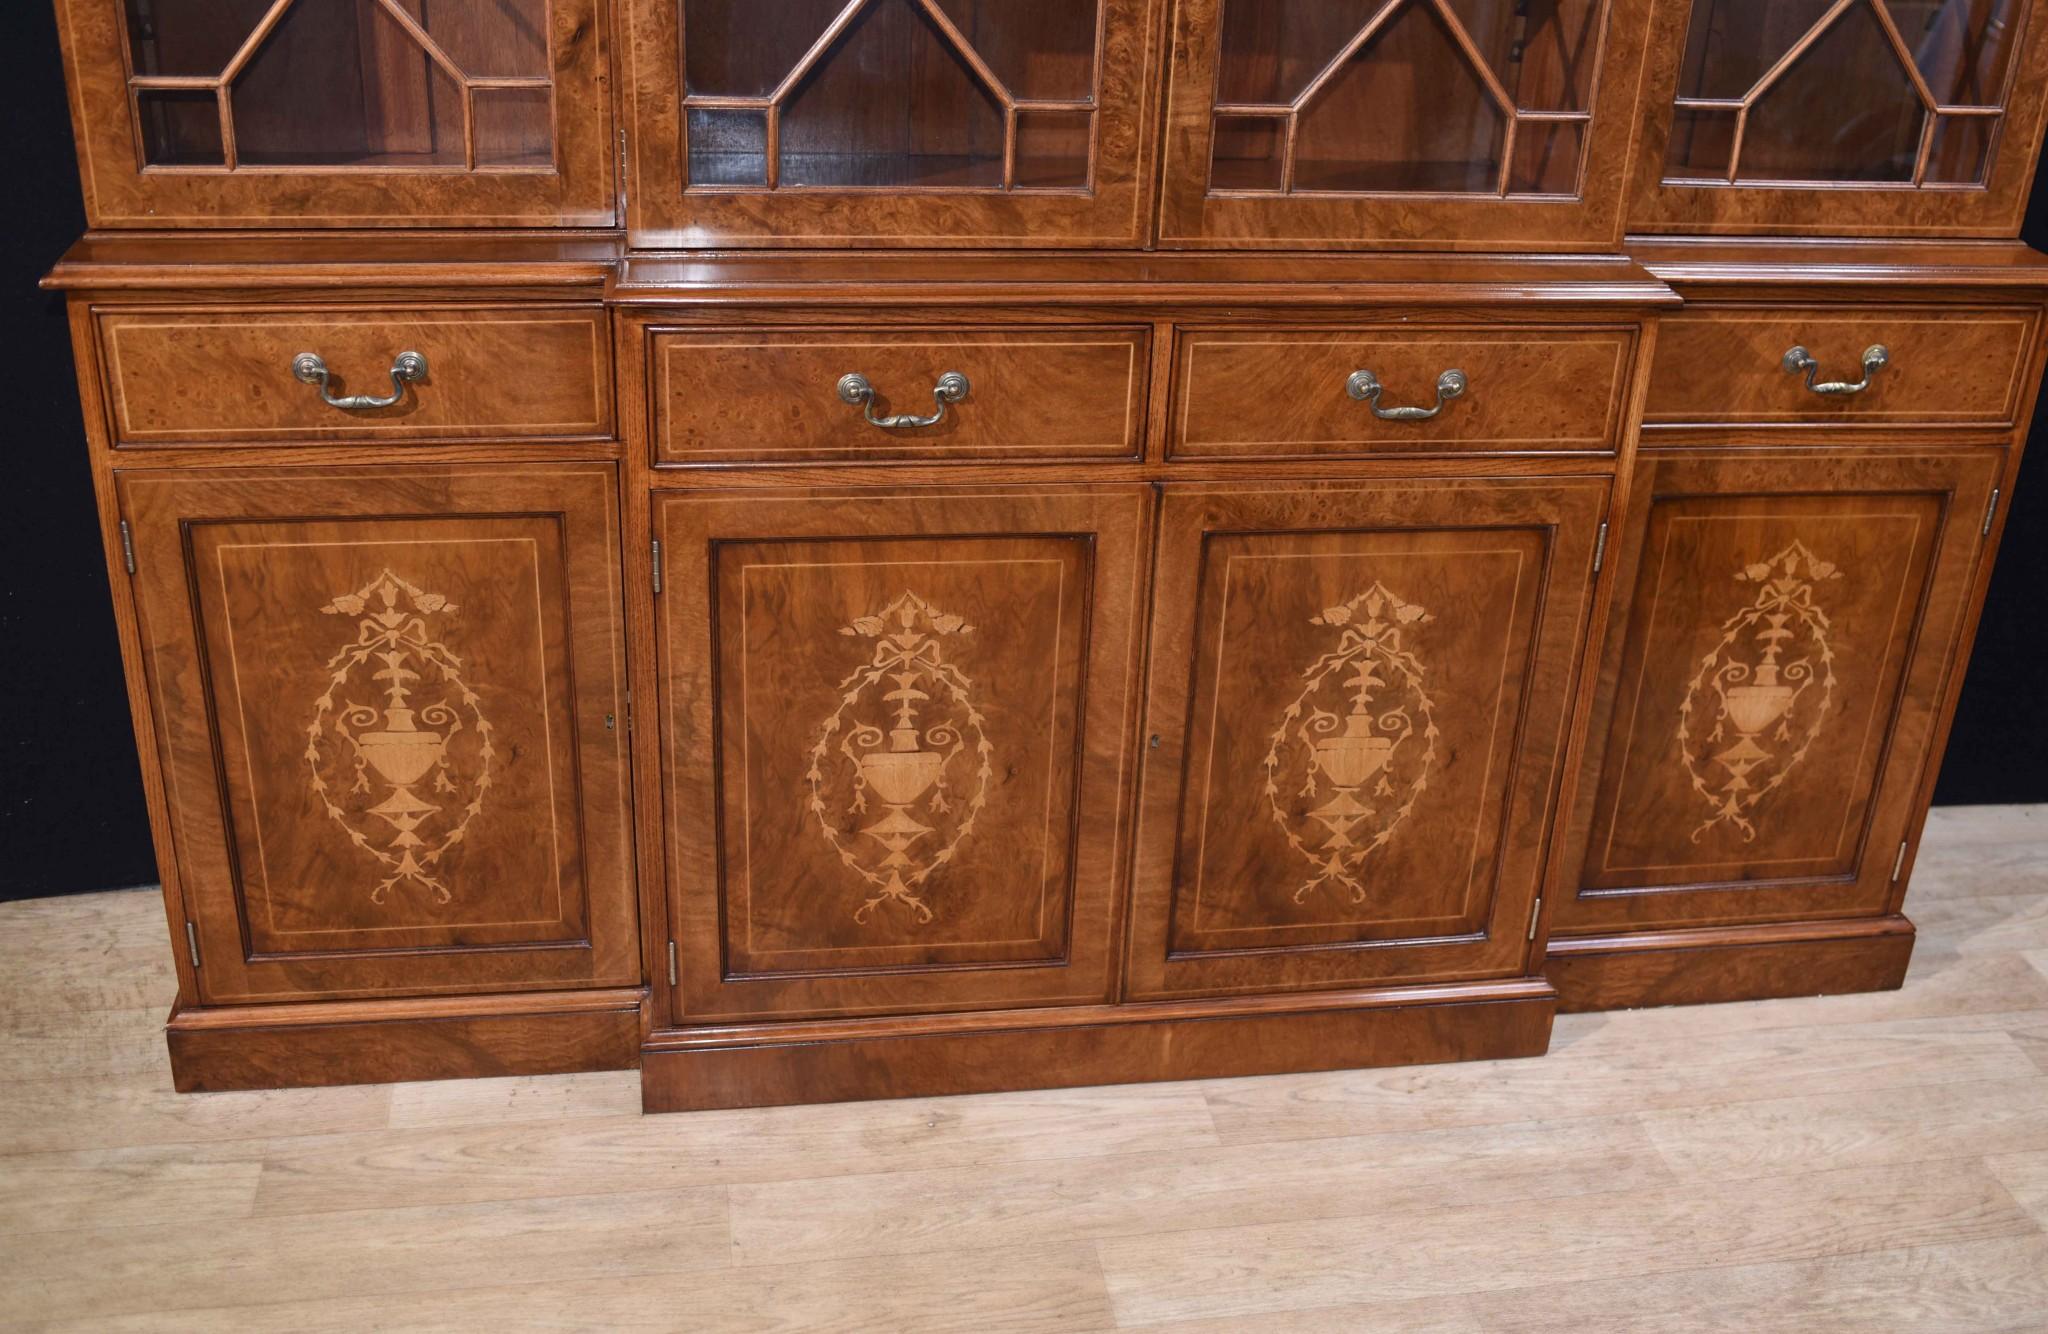 - You are viewing a gorgeous English Sheraton style breakfront bookcase in burr walnut
- I hope the photos does this important piece some justice, it\'s certainly more impressive in the flesh
- The inlay work is amazing and includes typical